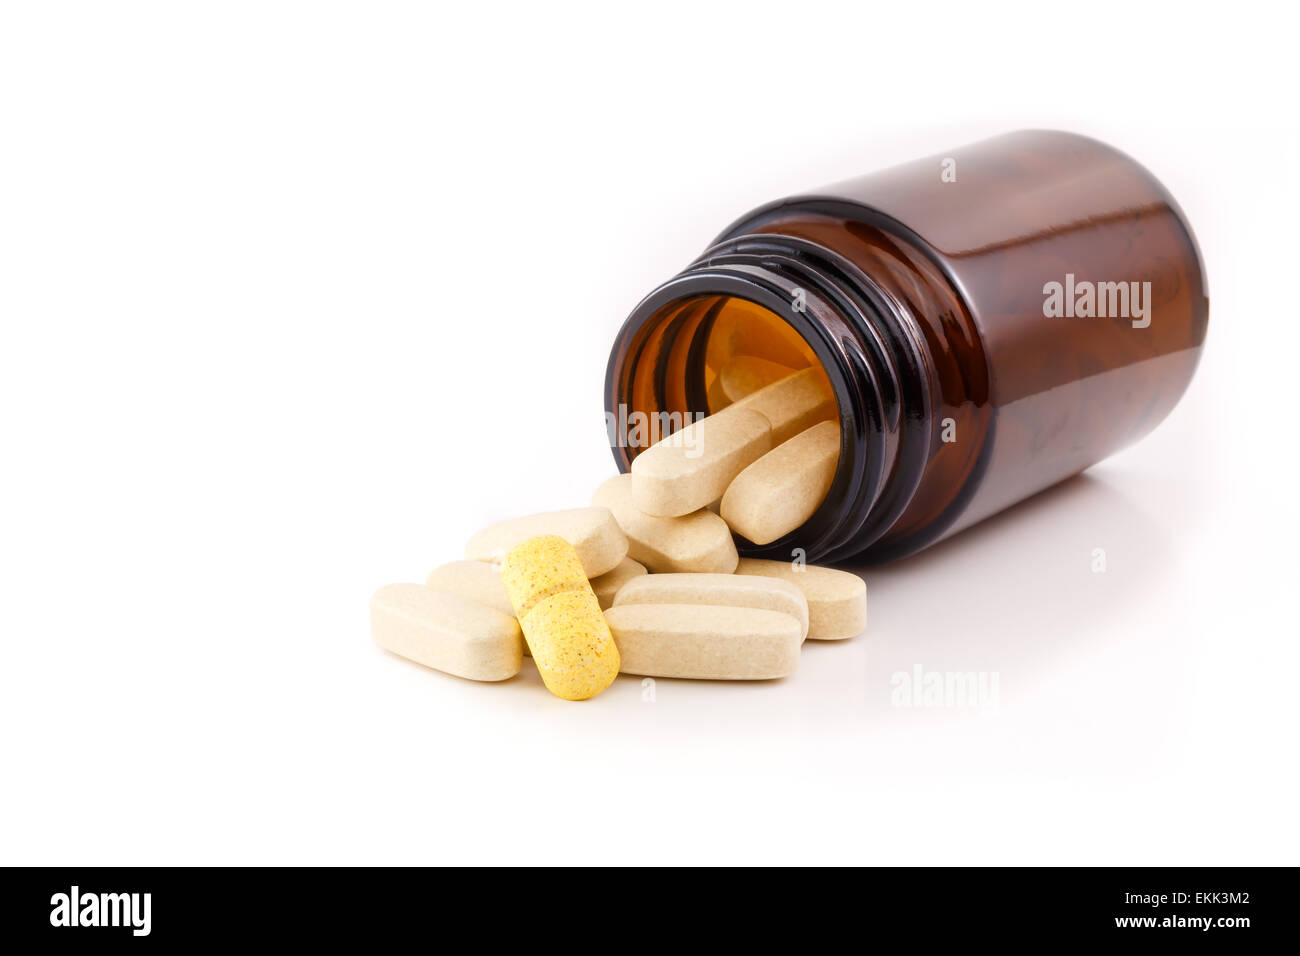 Pills fallen out of brown bottle. One pill is yellow and different. Studio shot on white background, view side of bottle. Stock Photo